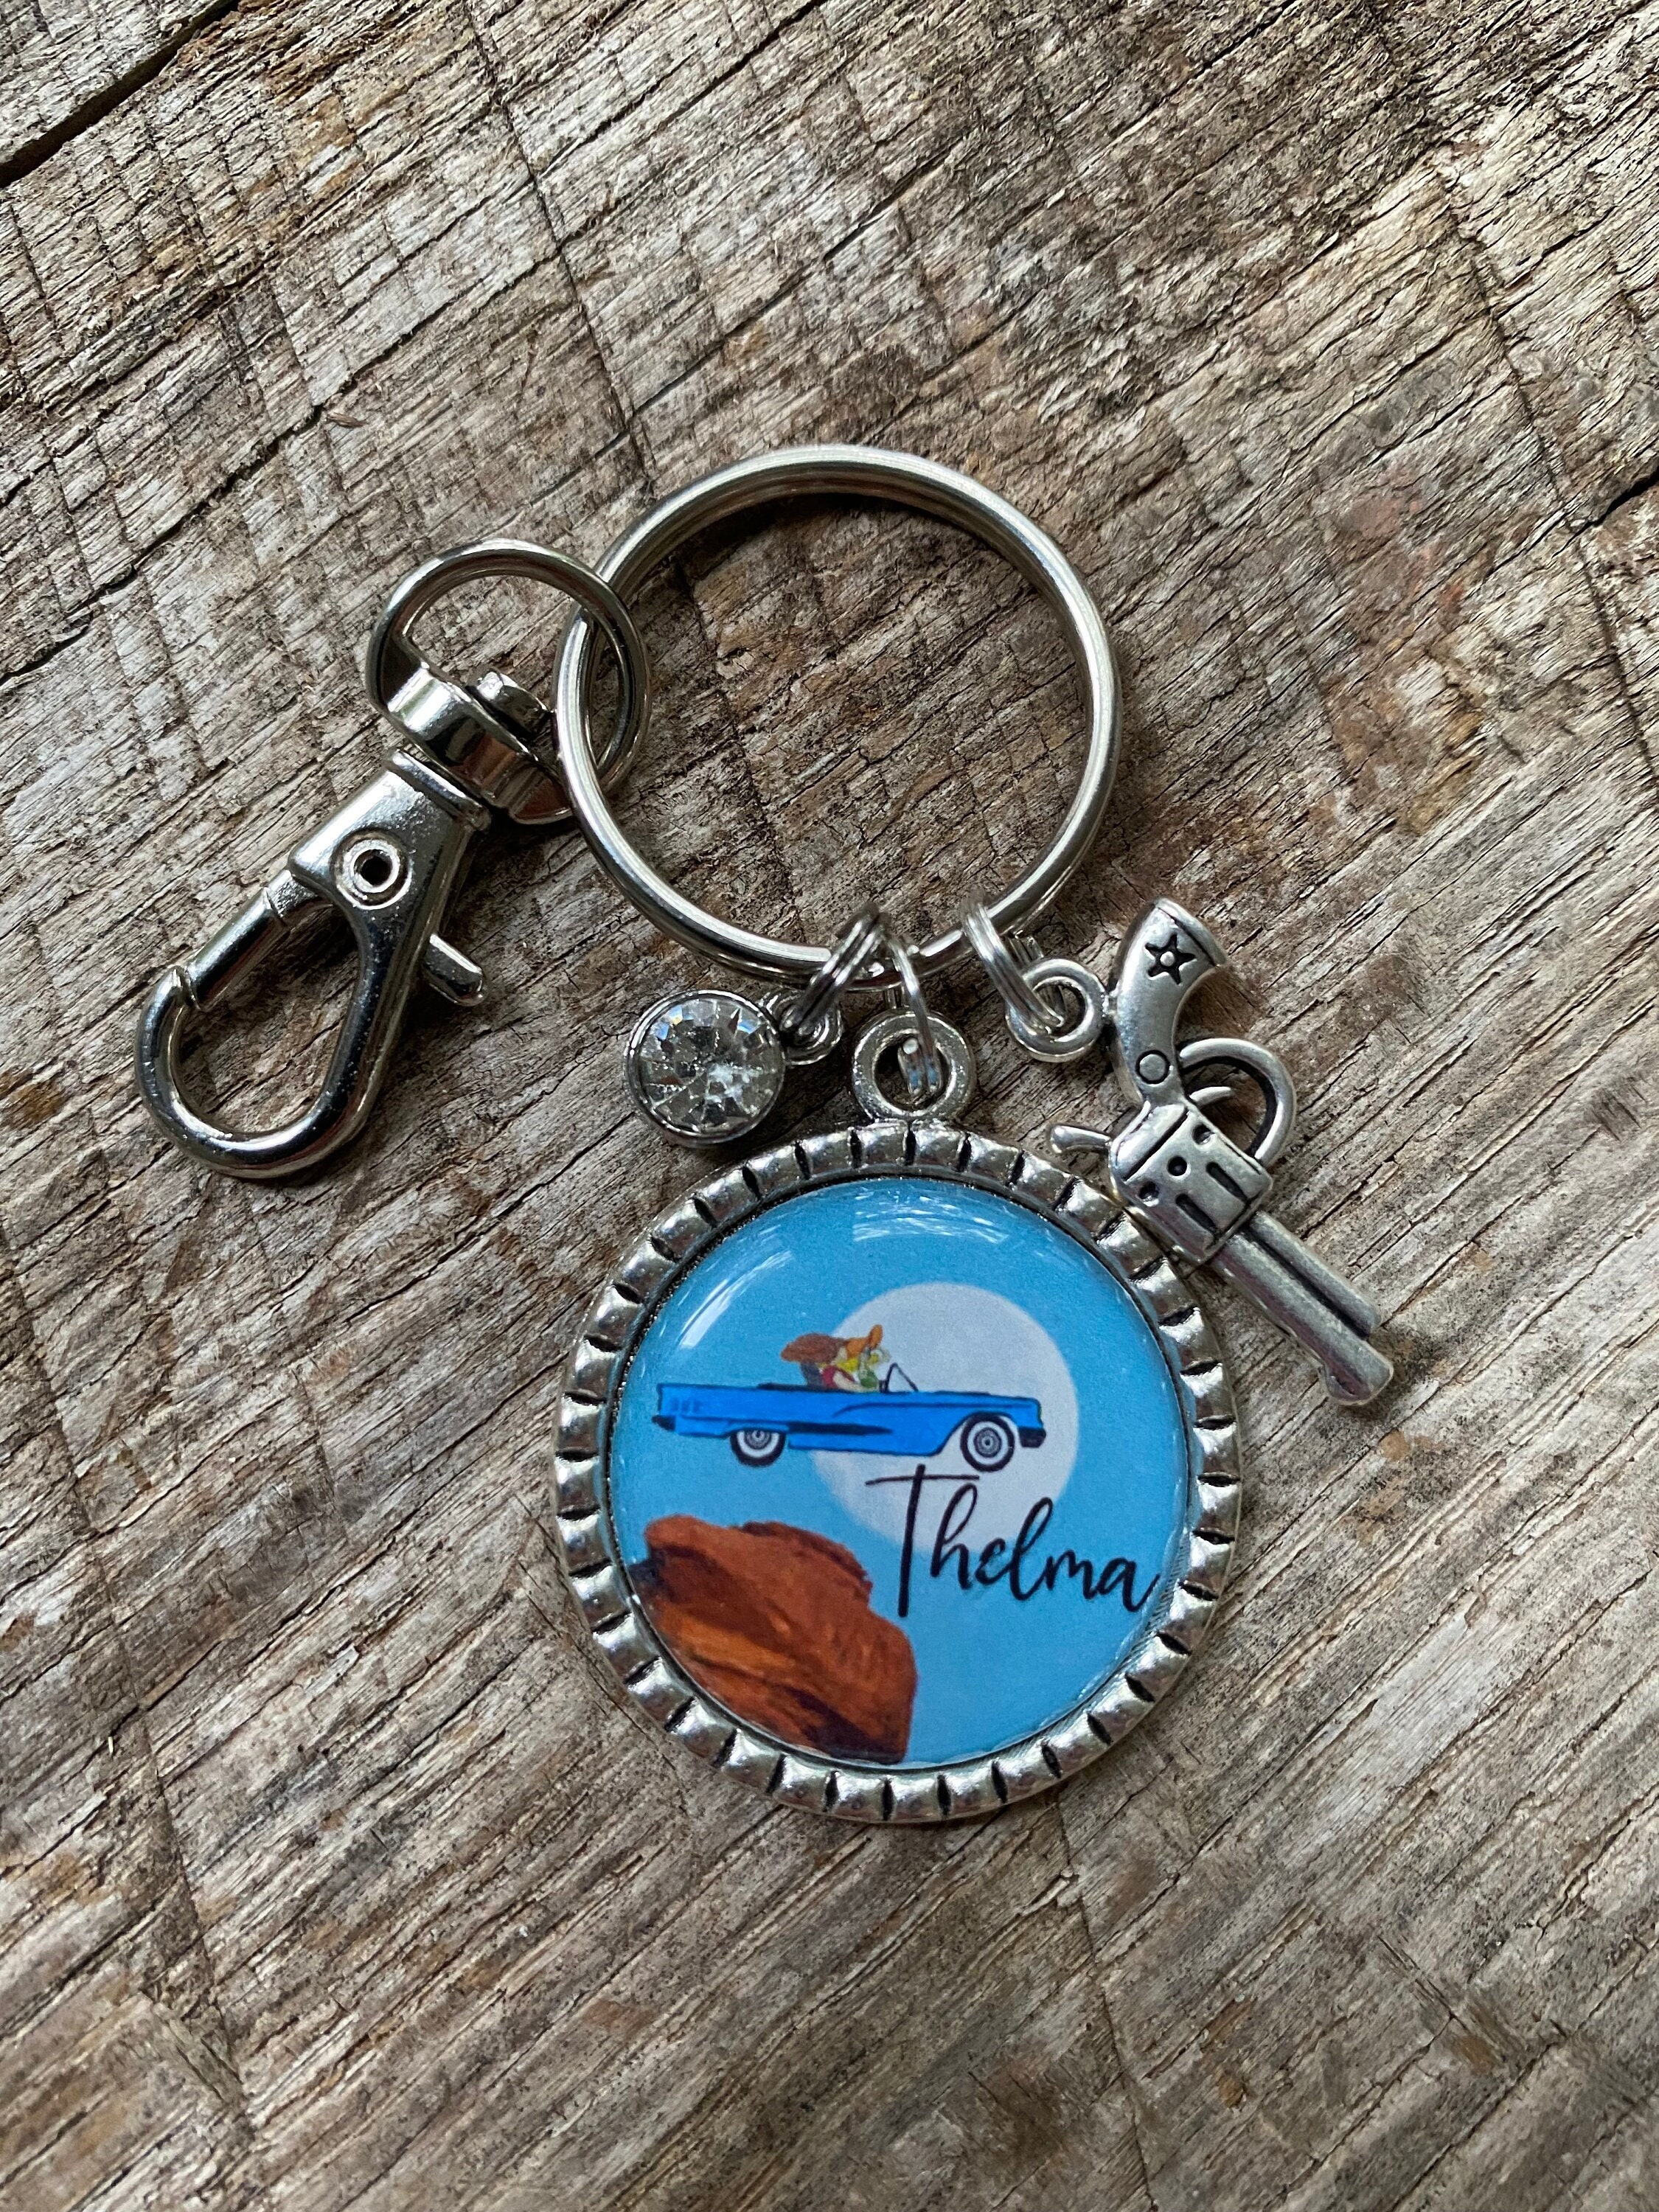 Lparkin Thelma And Louise Keychain Set - You're The Thelma To My